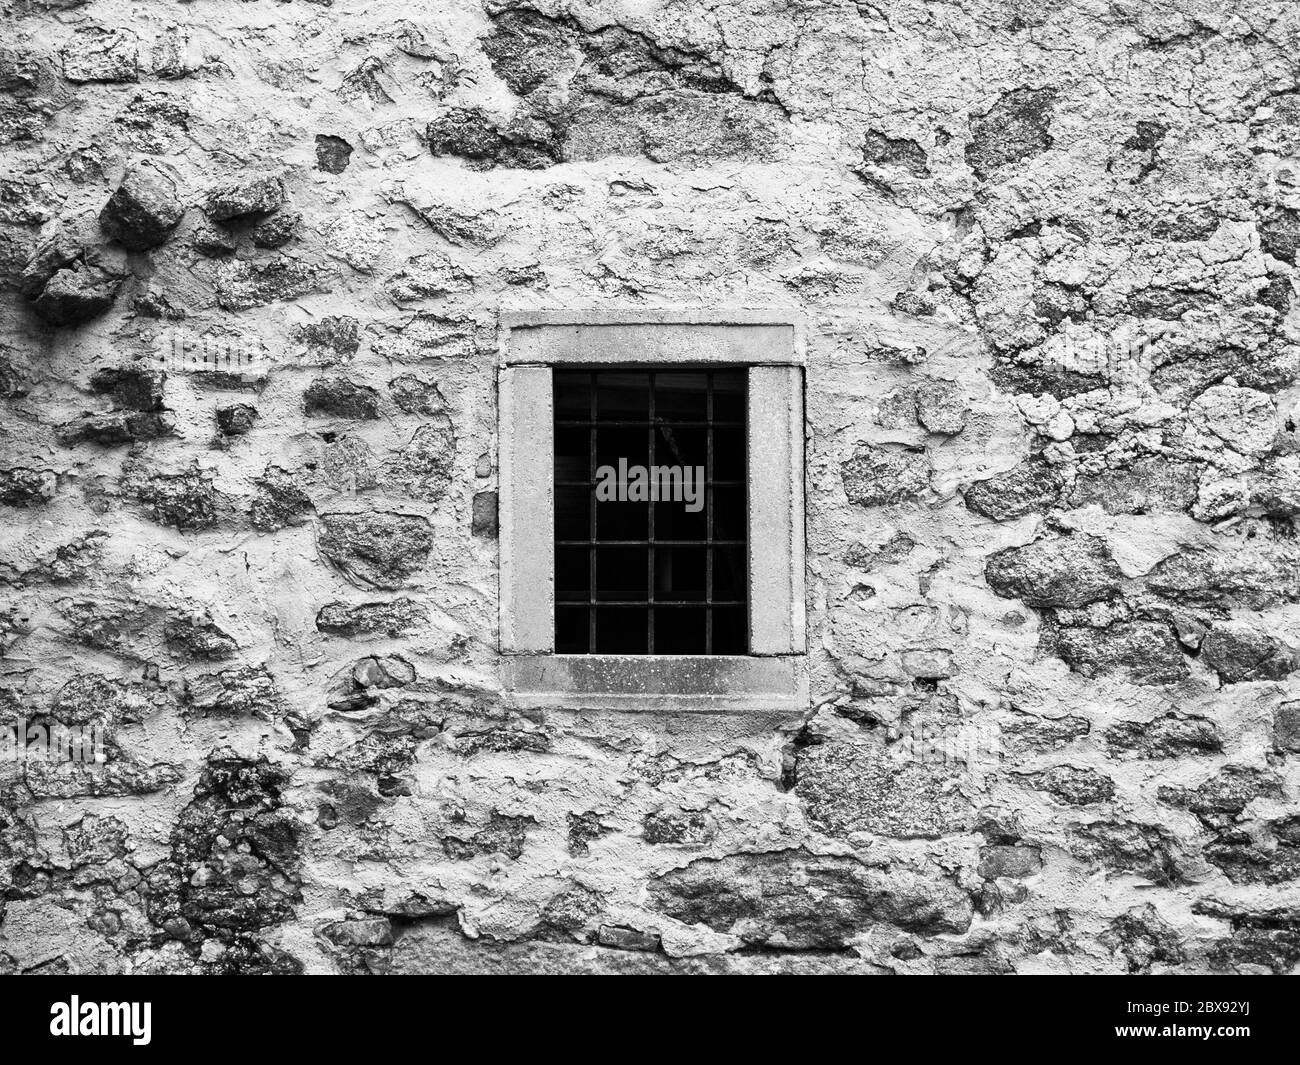 Old prison jail window with rusty metal bars. Vintage style image. Black and white image. Stock Photo